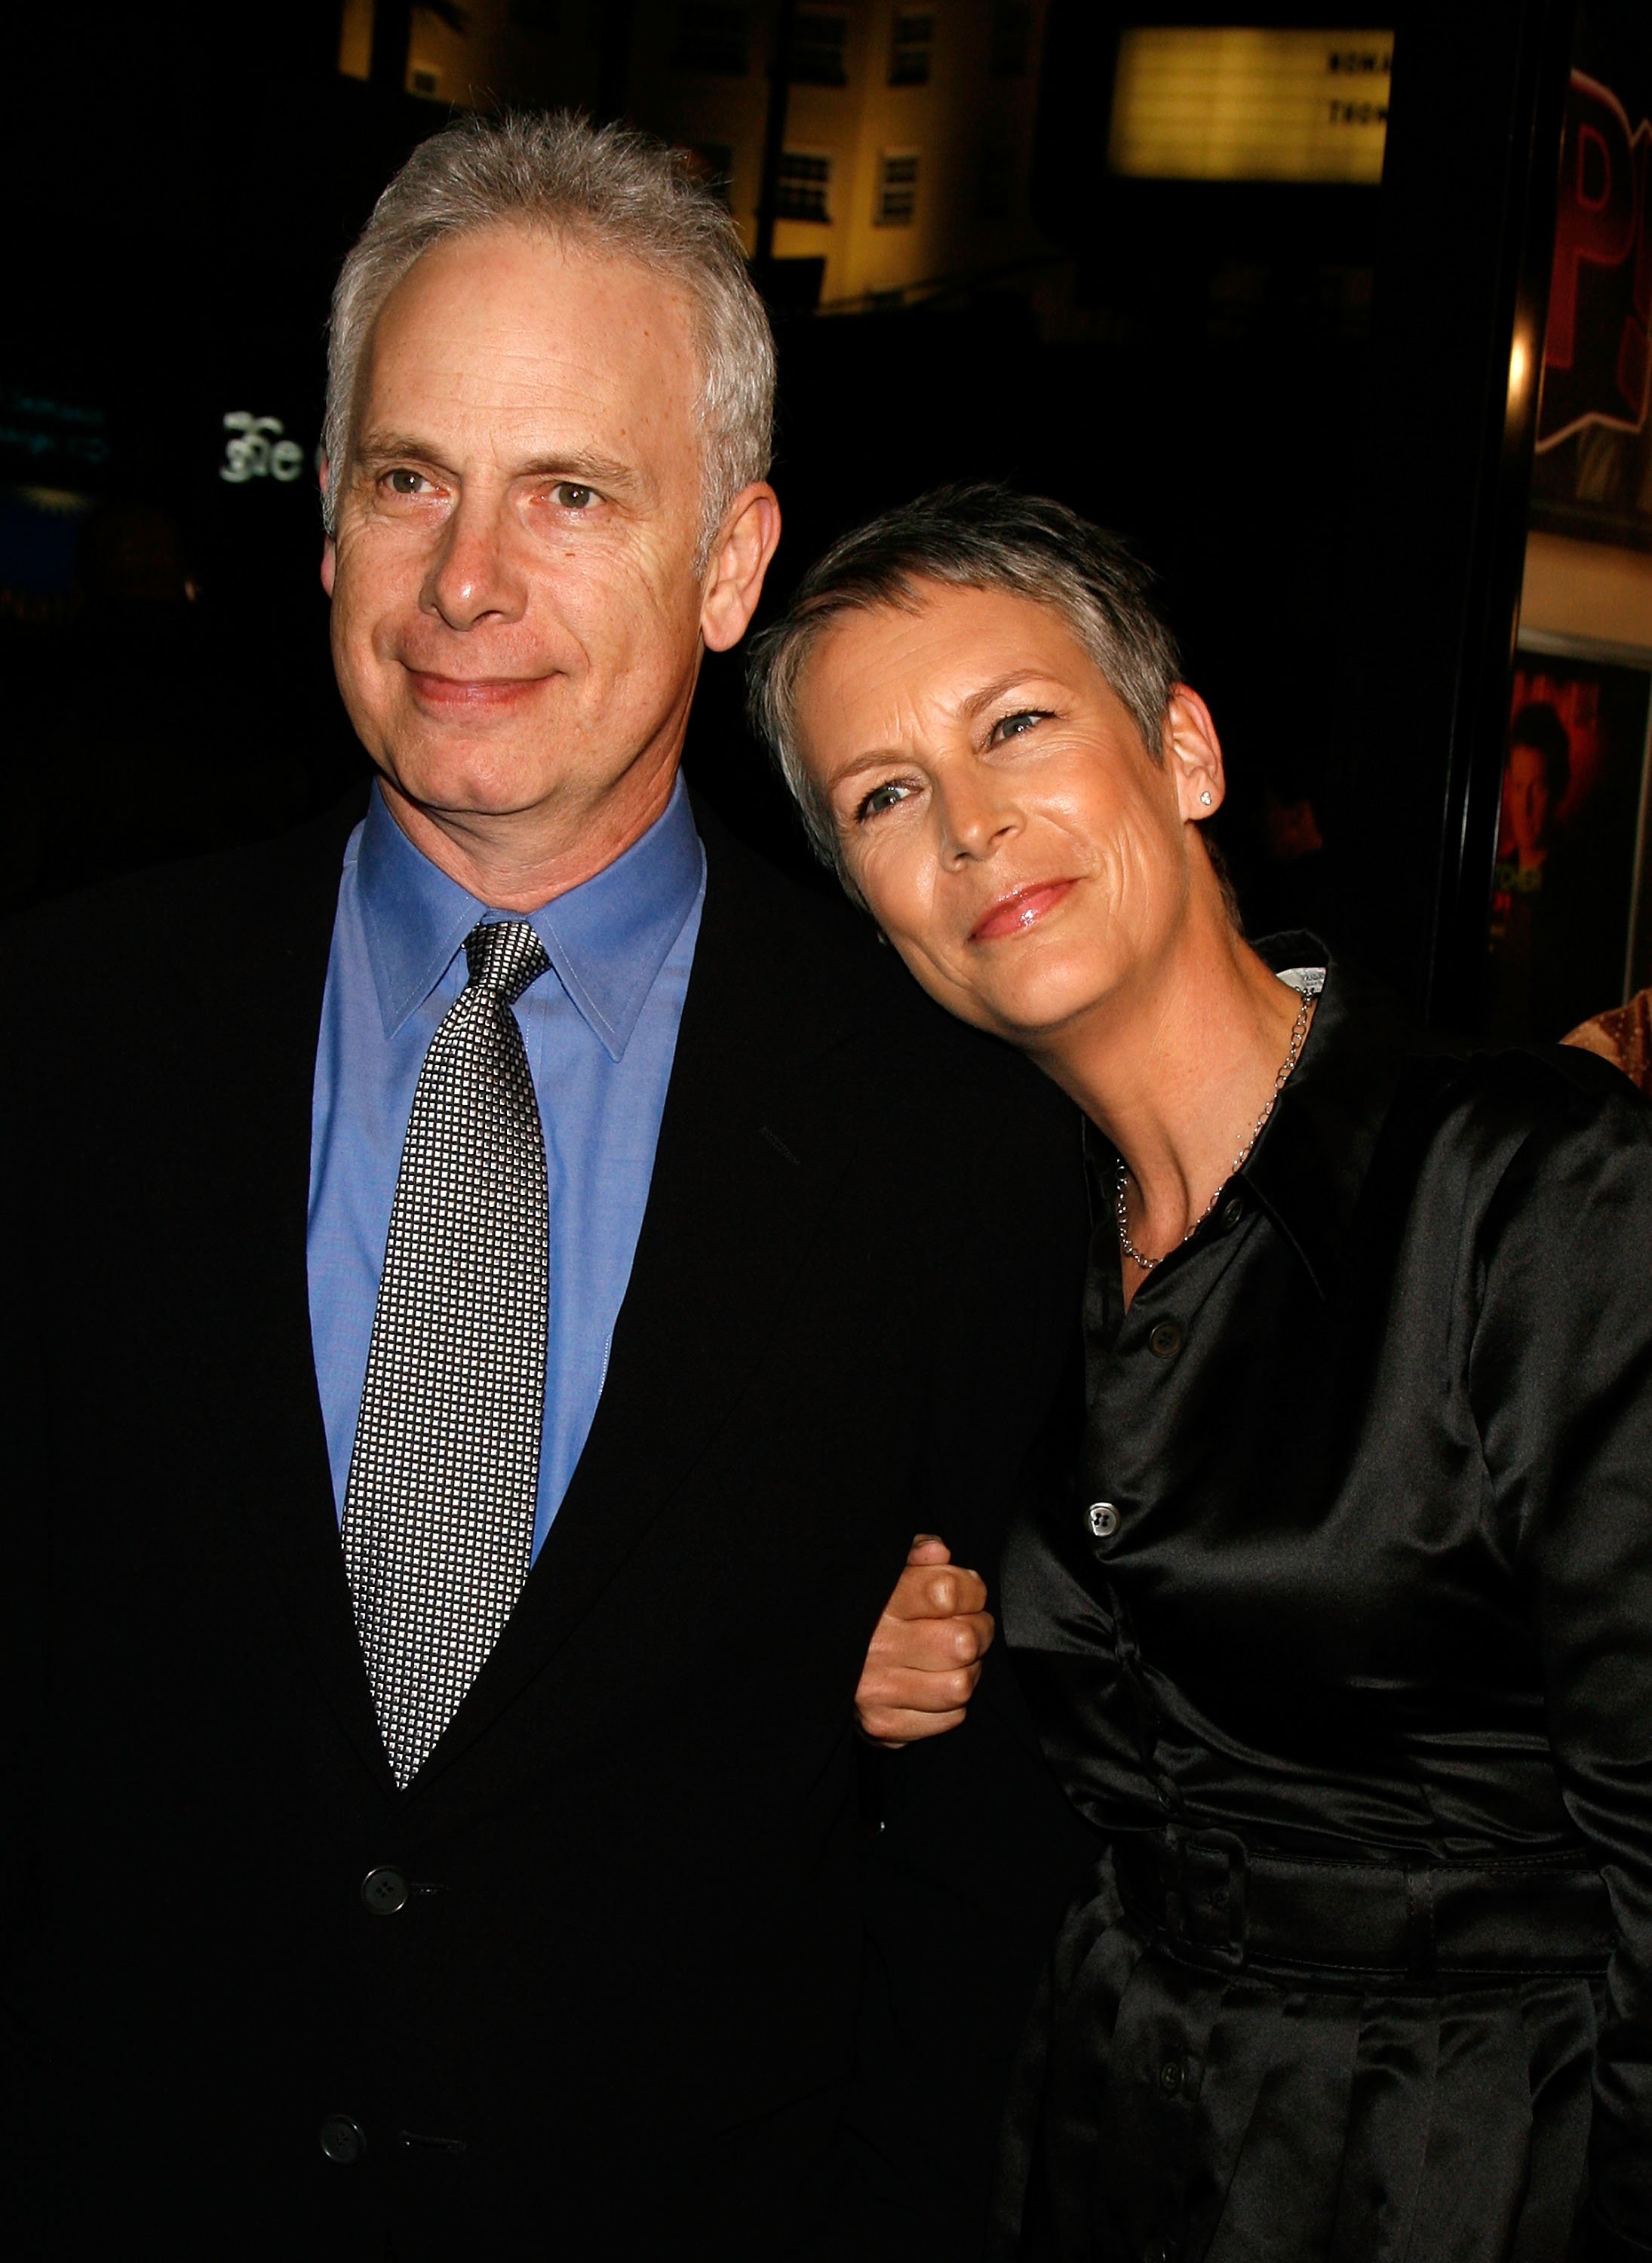  Christopher Guest and Jamie Lee Curtis arrive at the premiere of "Music and Lyrics" at the Grauman's Chinese Theatre on February 7, 2007 | Photo: GettyImages